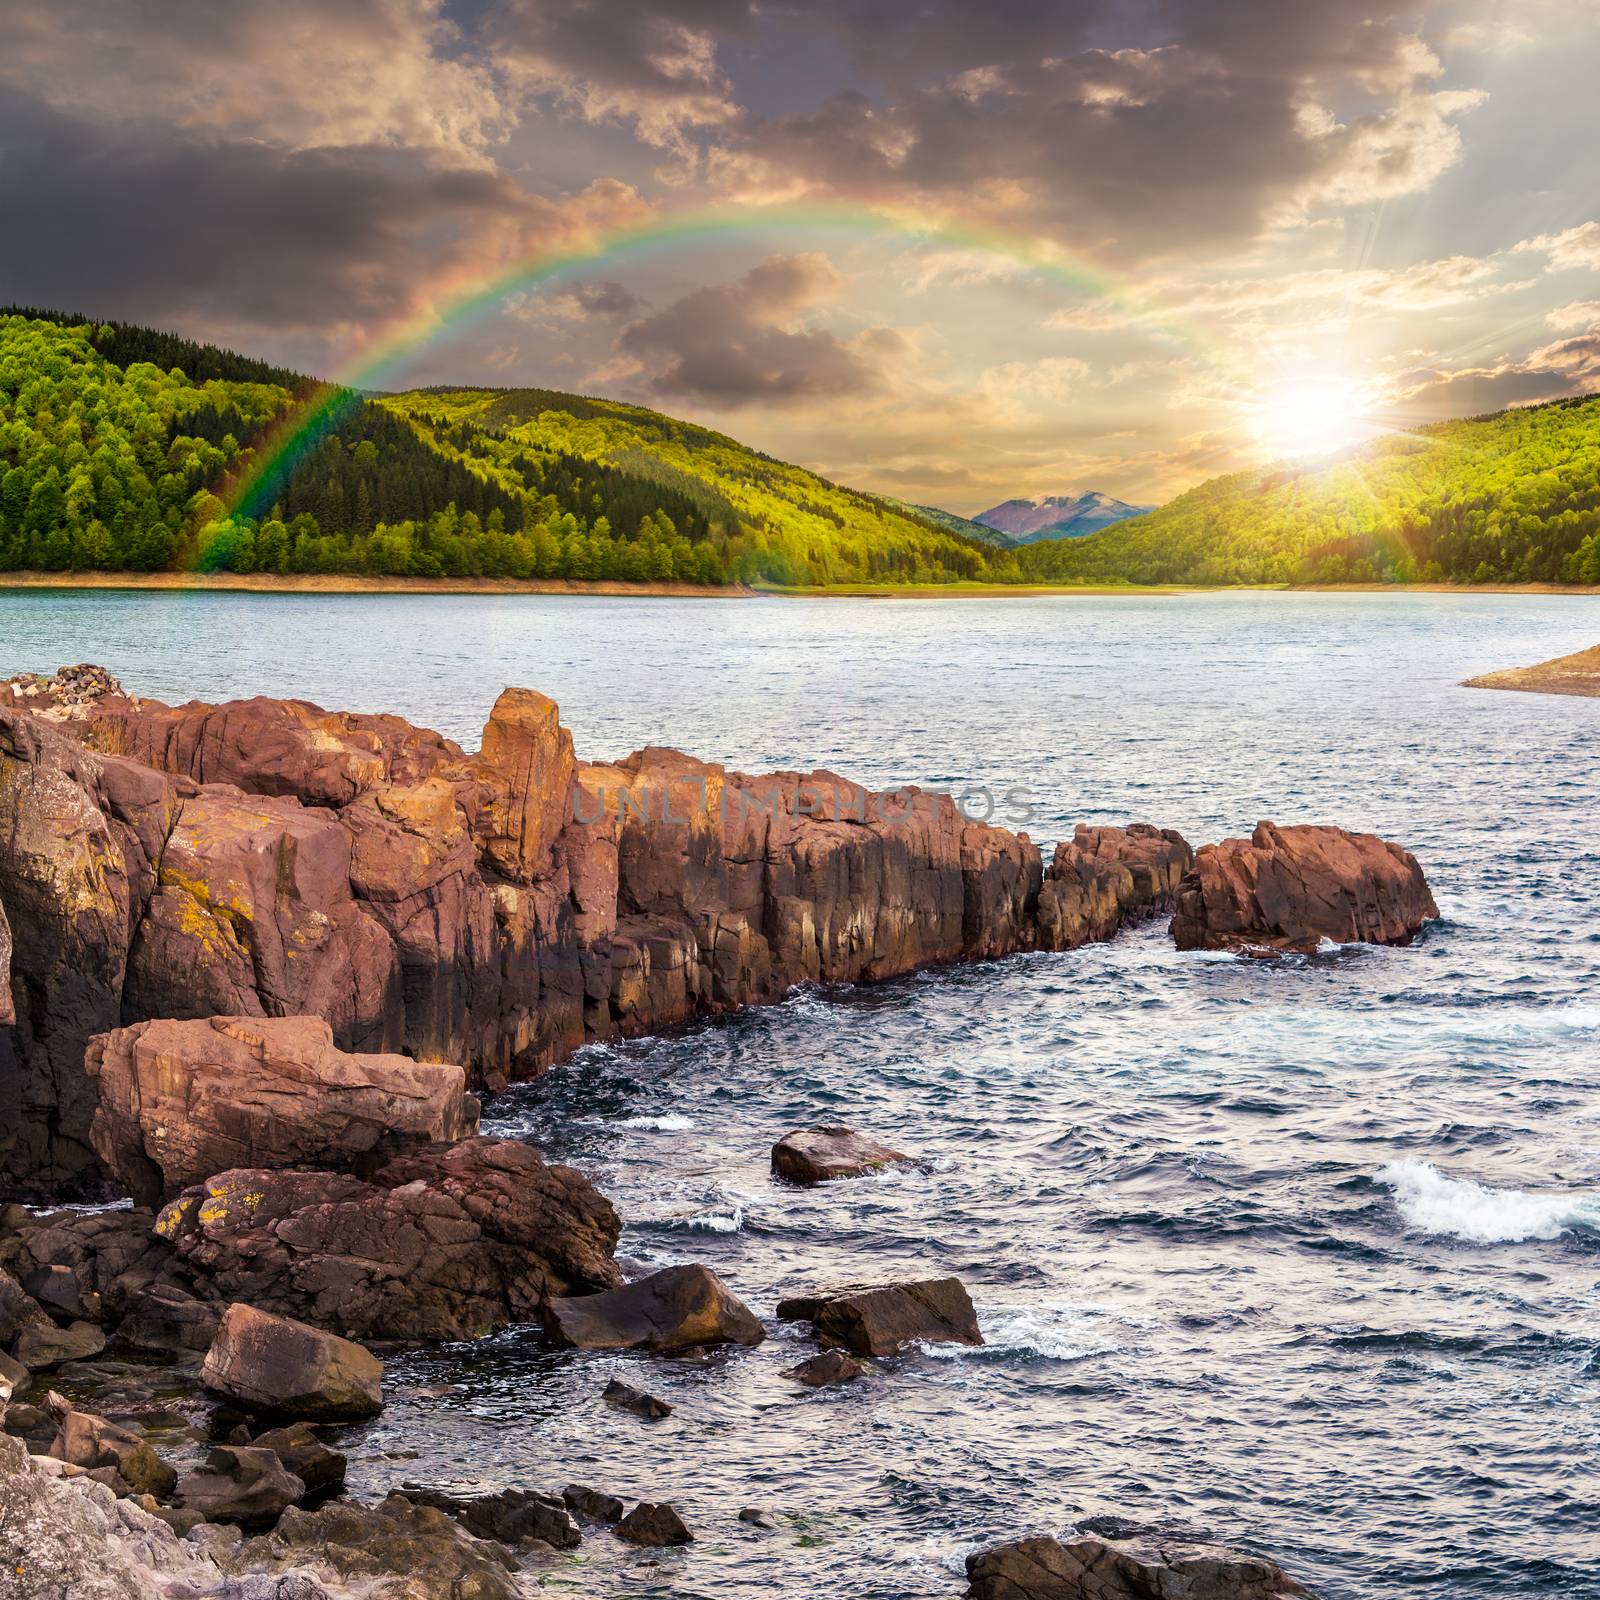 composite image of summer landscape  on lake with rocky shore and some boulders near forest under the rainbow  in mountain  with high peak far away in evening light